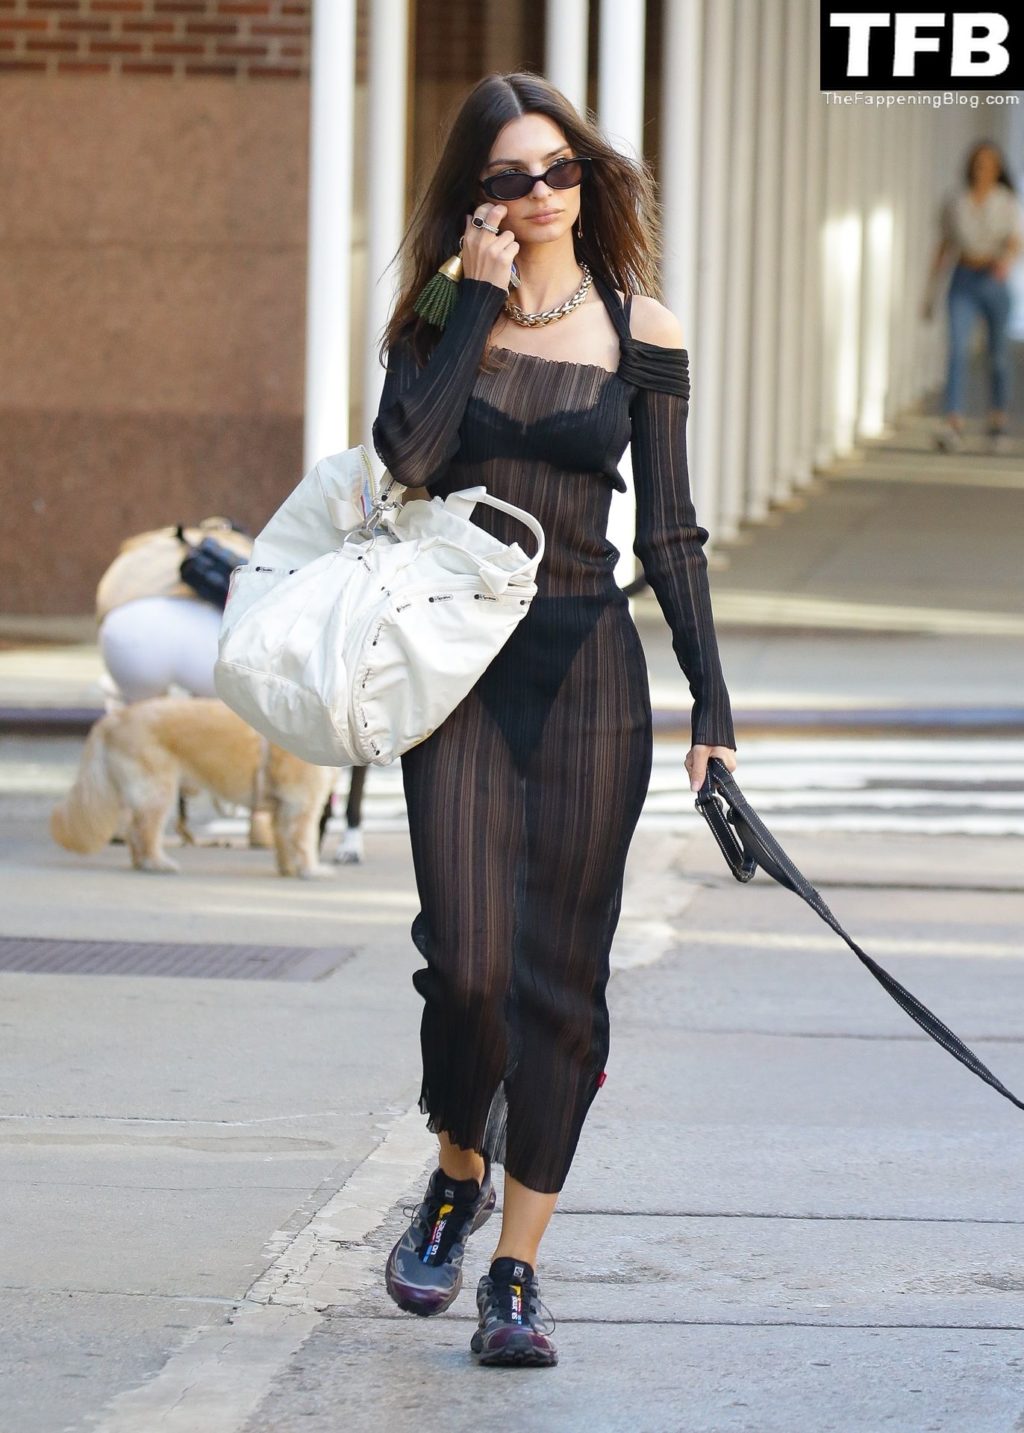 Emily Ratajkowski Sexy The Fappening Blog 6 2 1024x1433 - Emily Ratajkowski Bares It All in a See-Through Dress While Out Walking Her Dog in New York (33 Photos)